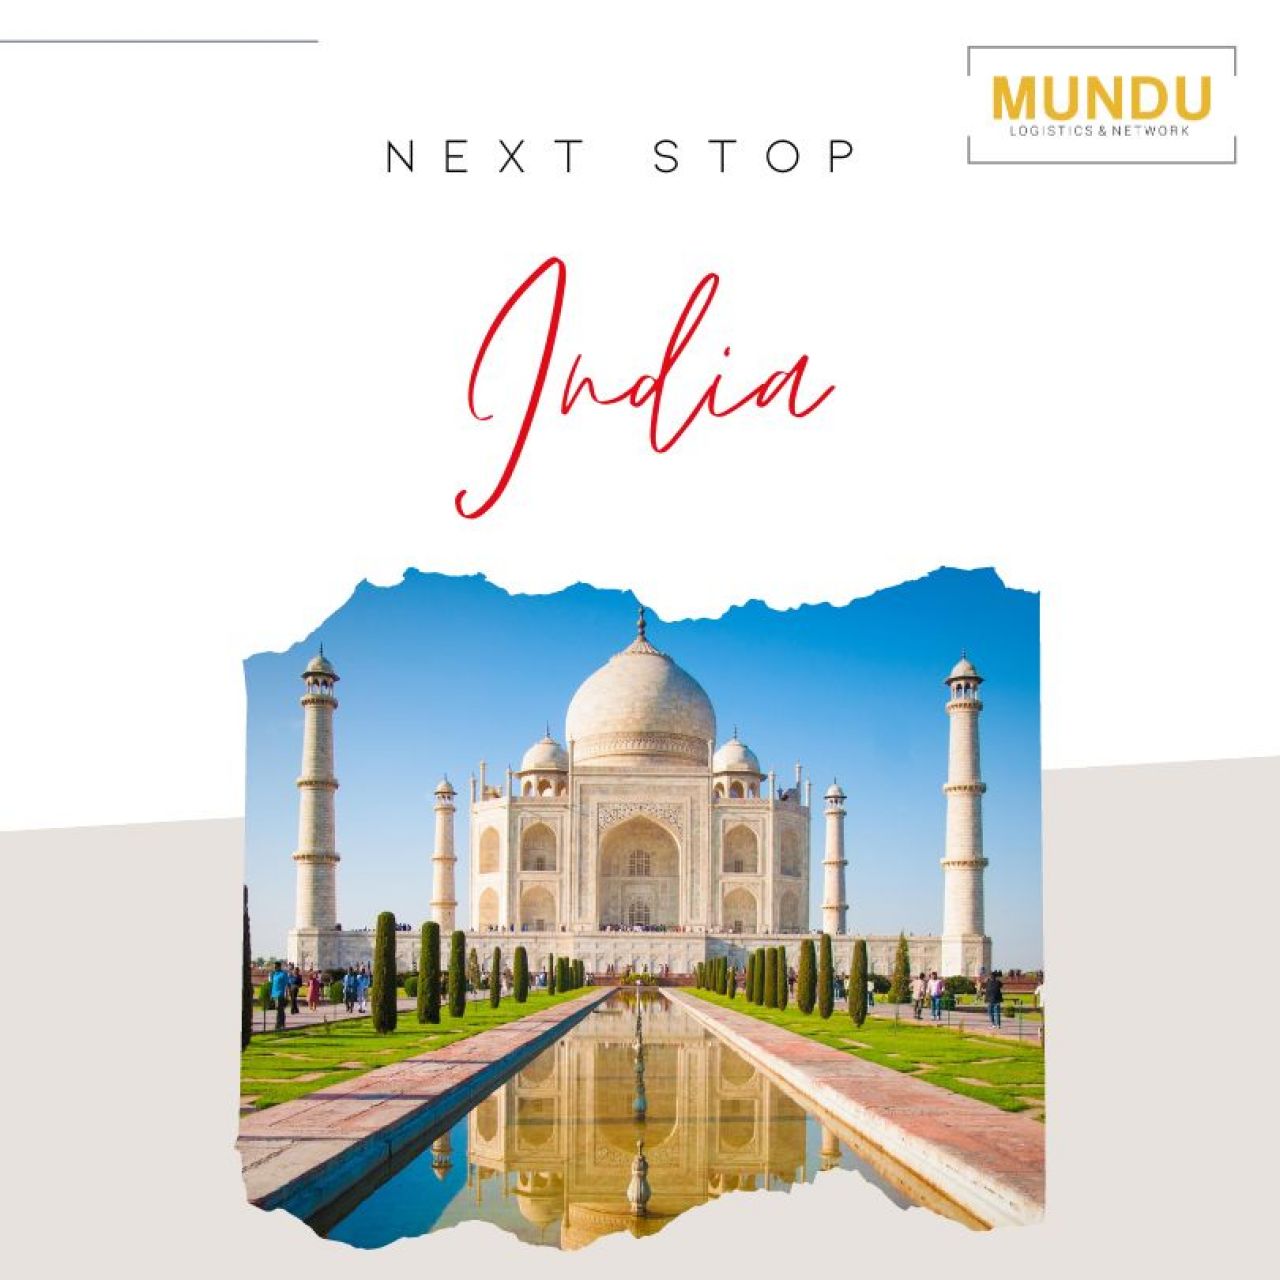 MUNDU is travelling to India